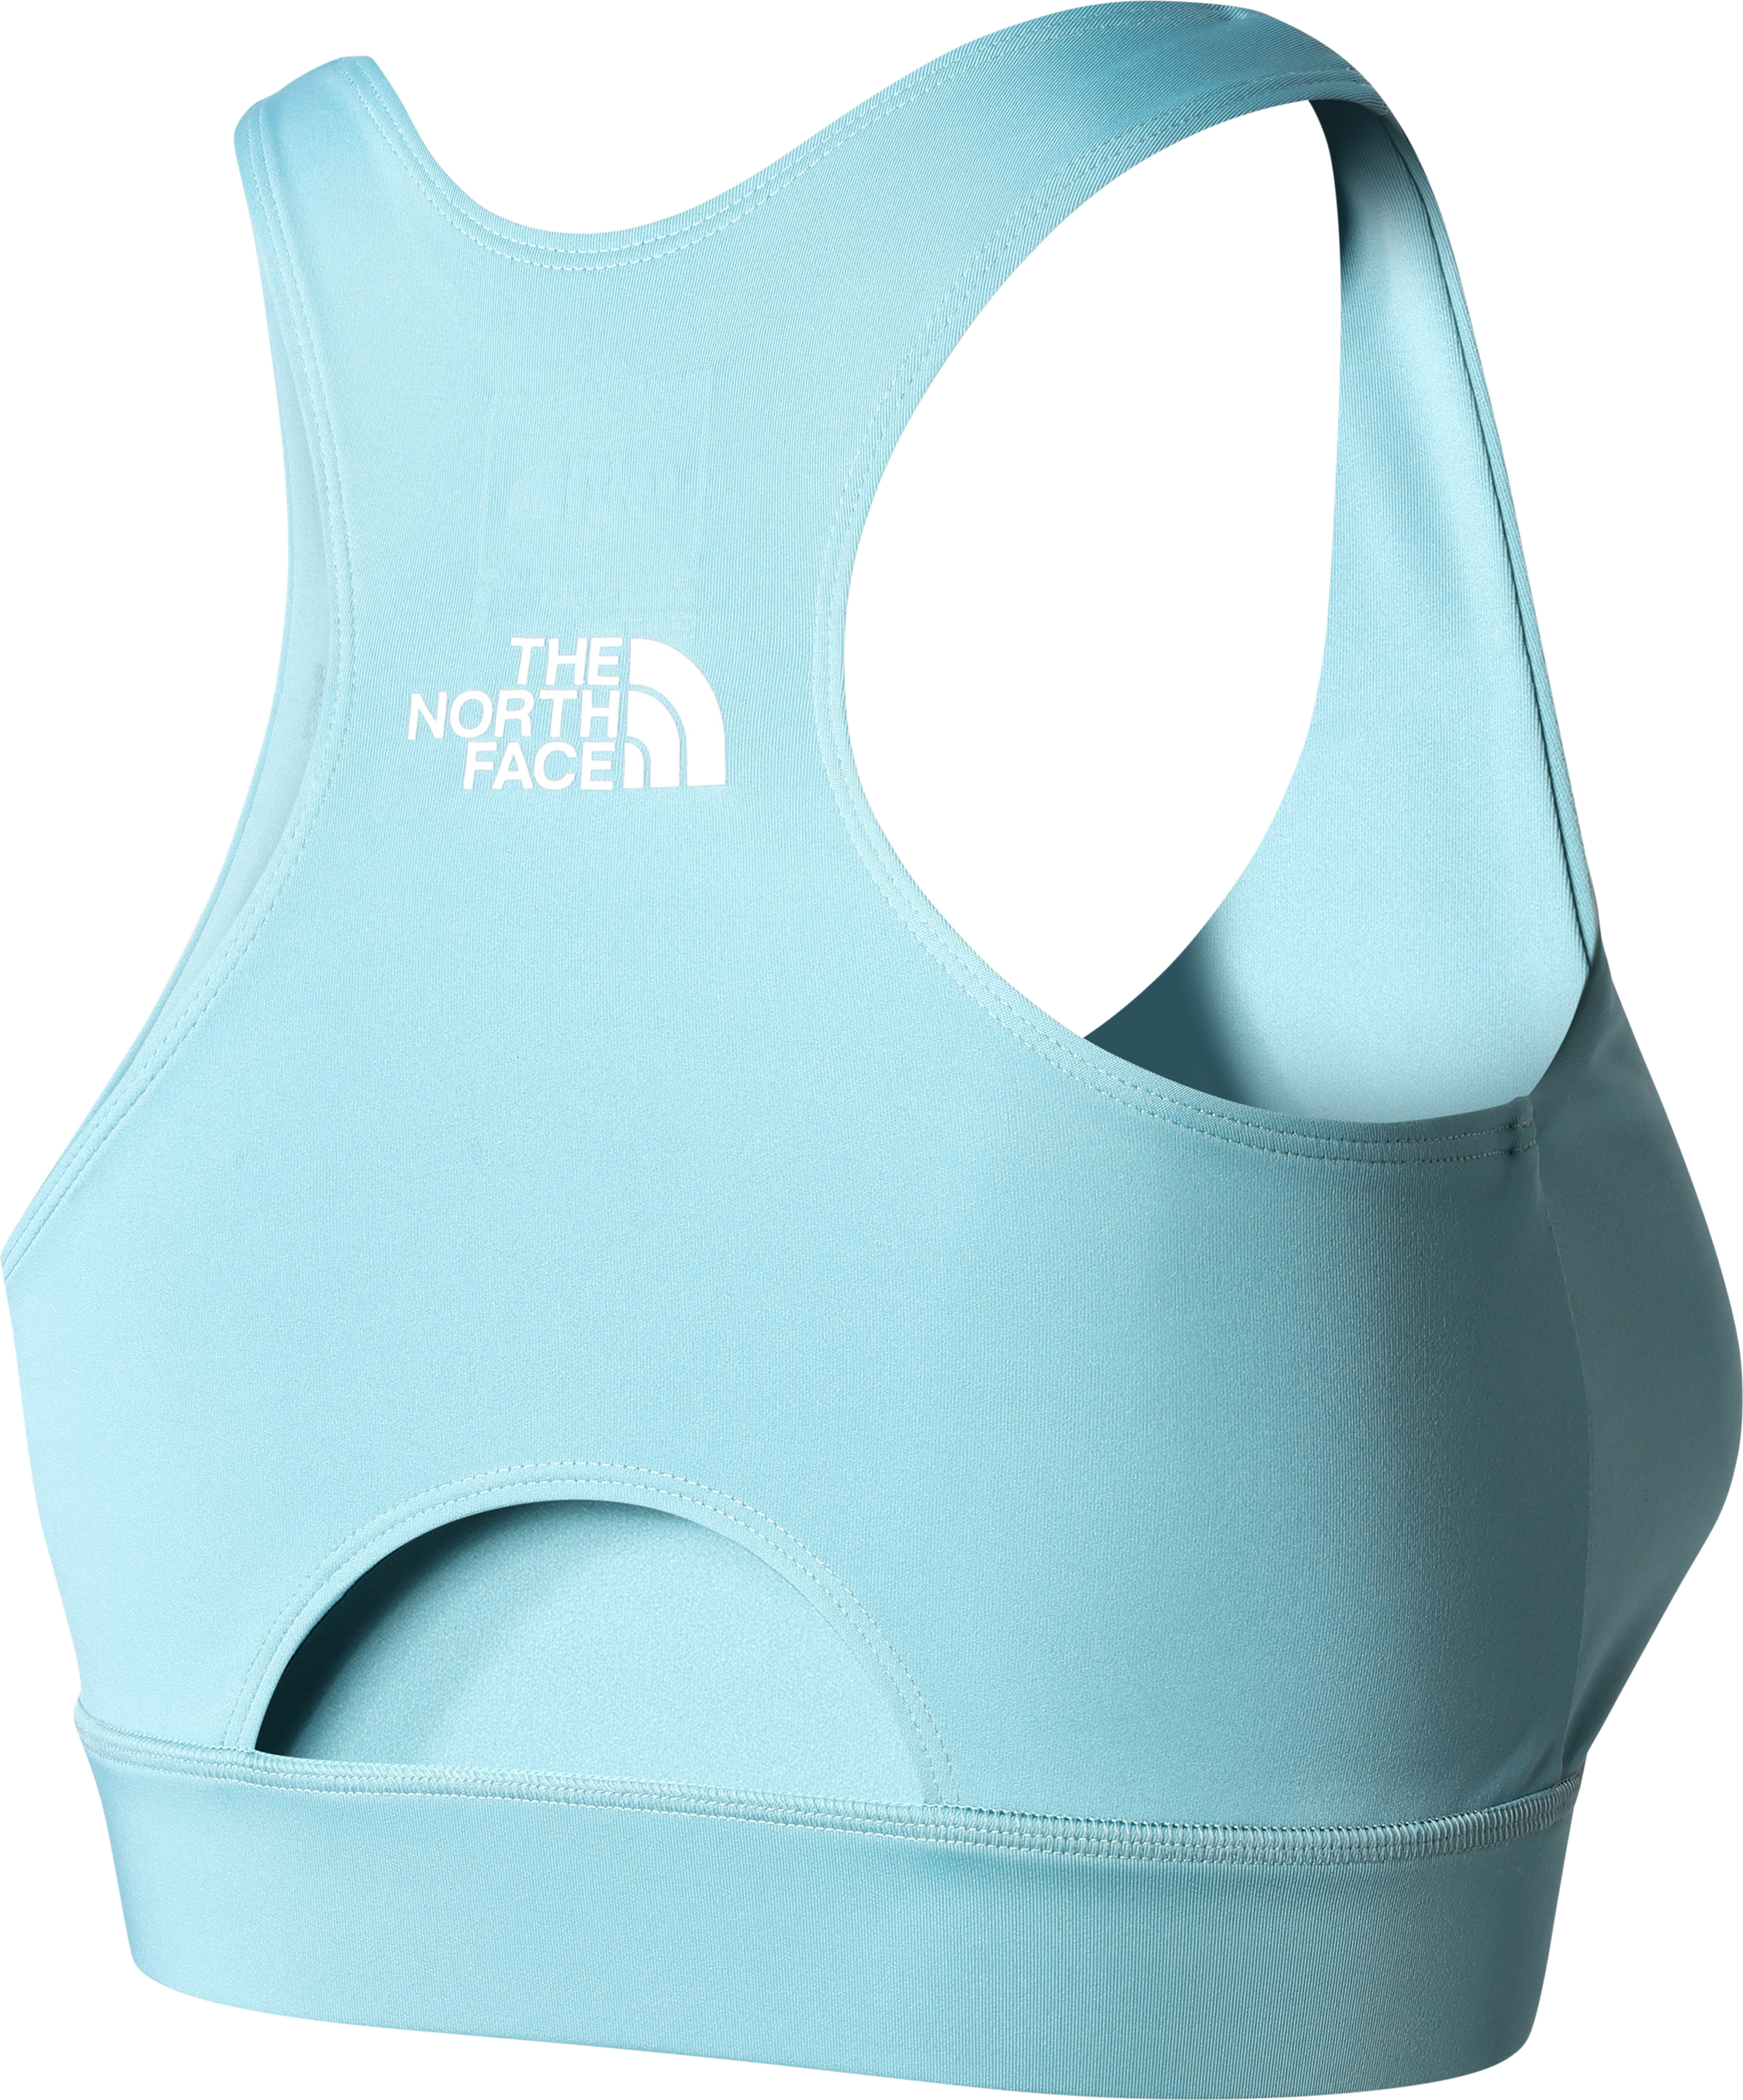 https://www.fjellsport.no/assets/blobs/the-north-face-women-s-flex-bra-reef-waters-8ab2125d79.png